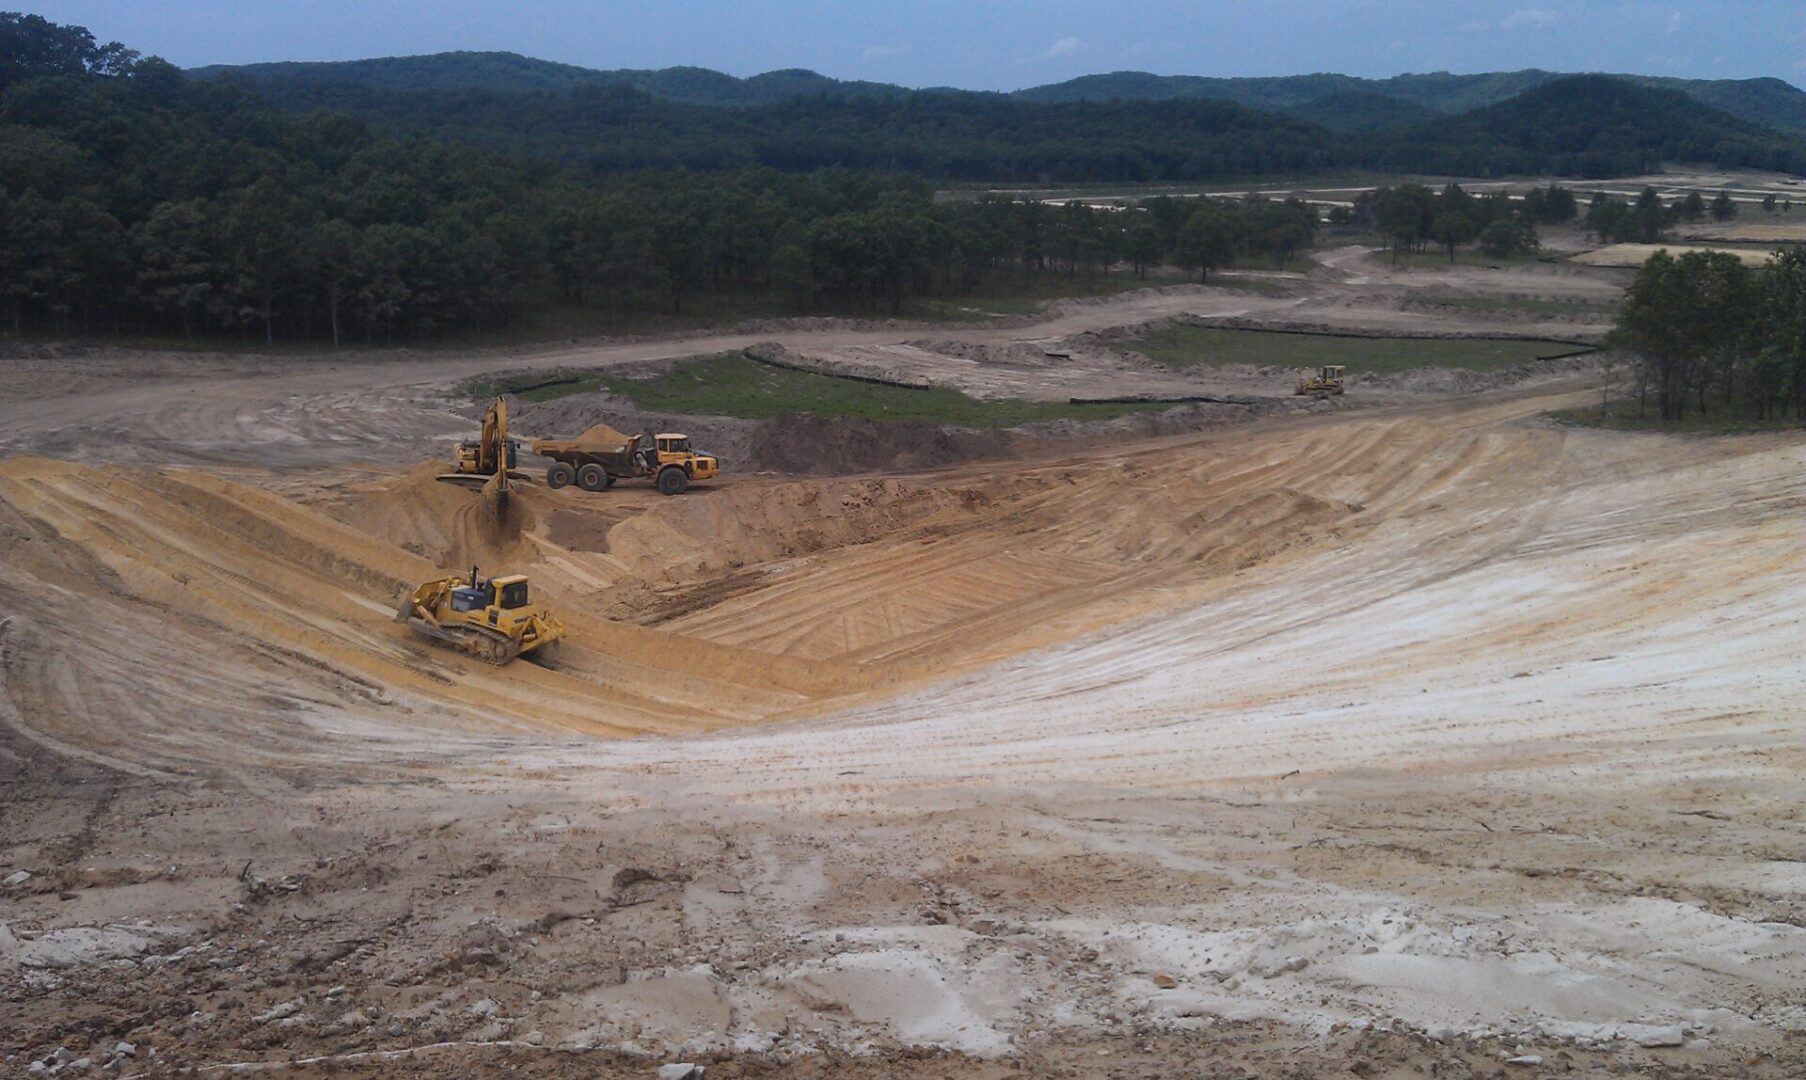 Heavy machinery operating in a large open-pit excavation site.